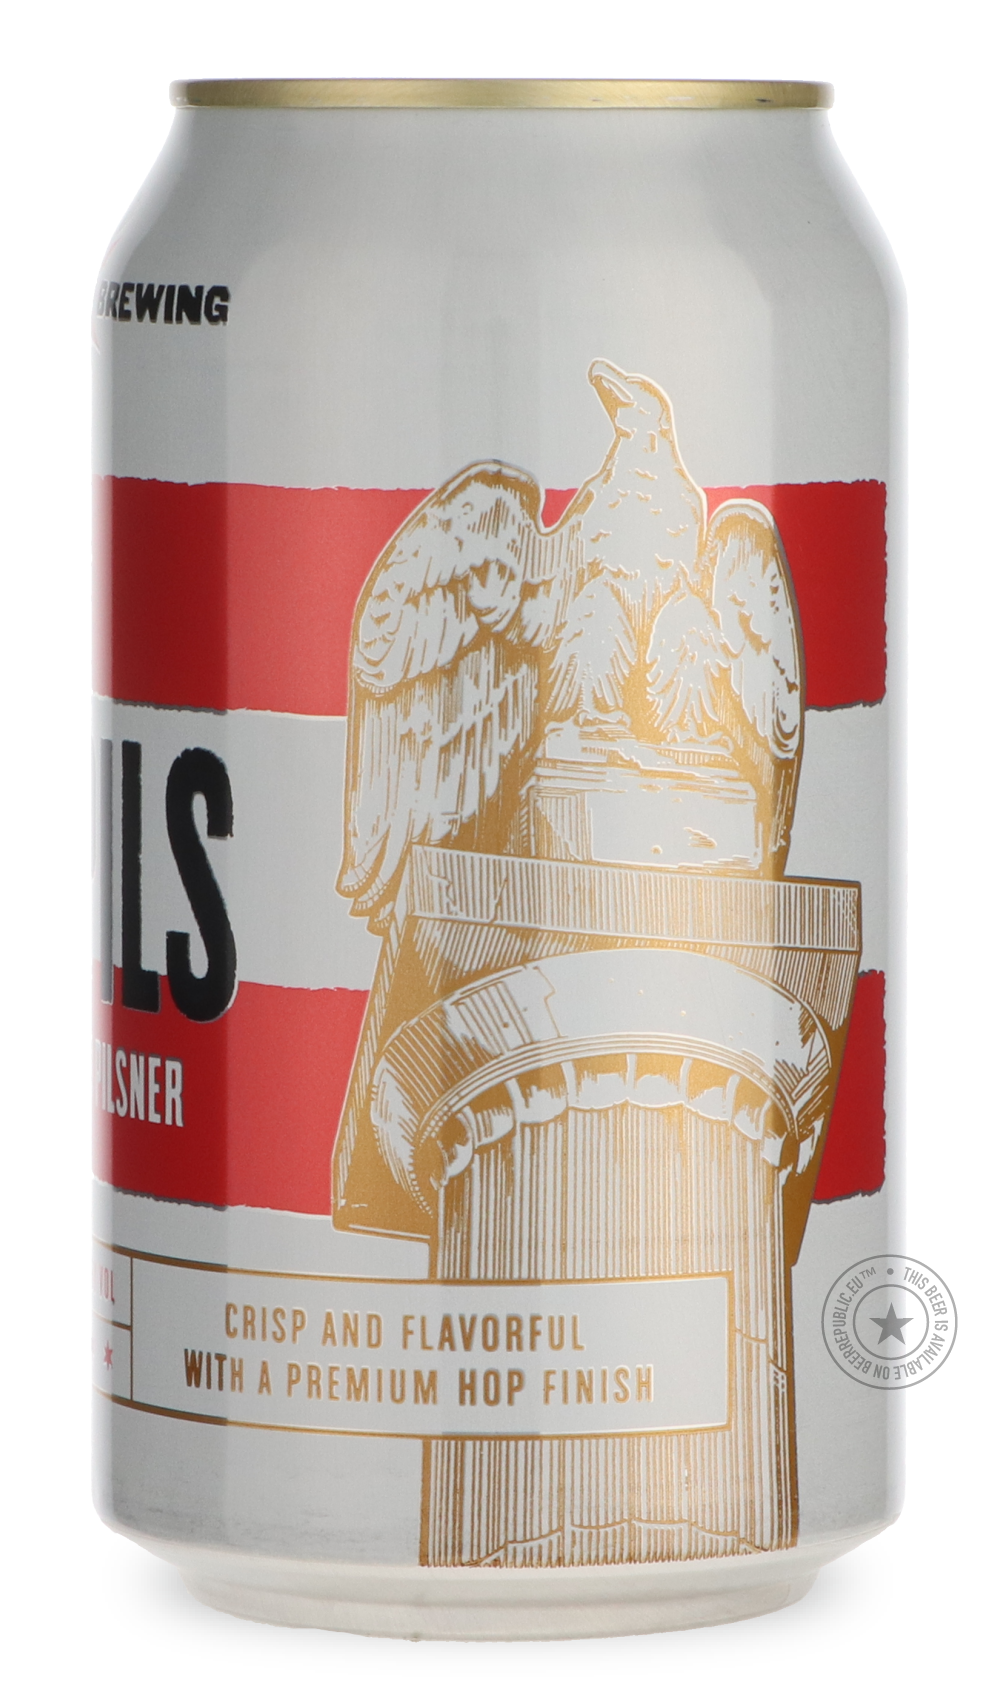 -Revolution- Rev Pils-Pale- Only @ Beer Republic - The best online beer store for American & Canadian craft beer - Buy beer online from the USA and Canada - Bier online kopen - Amerikaans bier kopen - Craft beer store - Craft beer kopen - Amerikanisch bier kaufen - Bier online kaufen - Acheter biere online - IPA - Stout - Porter - New England IPA - Hazy IPA - Imperial Stout - Barrel Aged - Barrel Aged Imperial Stout - Brown - Dark beer - Blond - Blonde - Pilsner - Lager - Wheat - Weizen - Amber - Barley Win